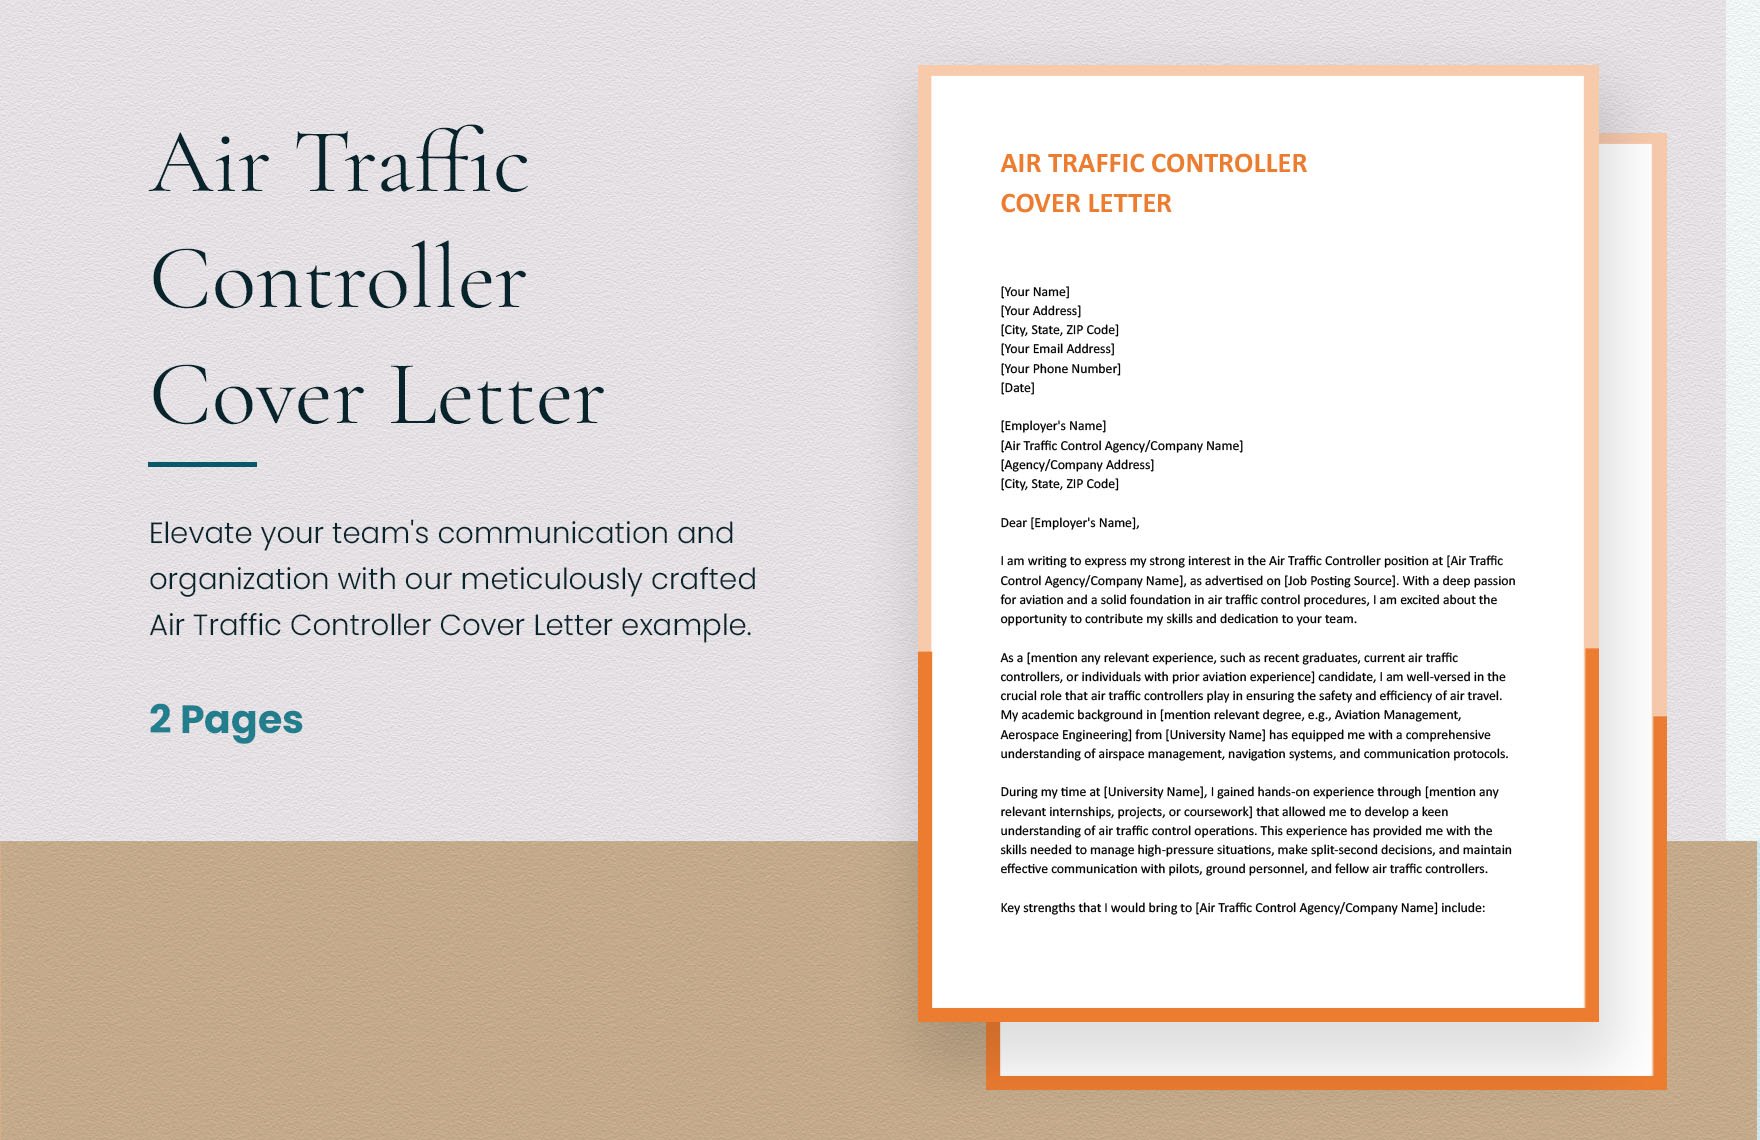 Air Traffic Controller Cover Letter